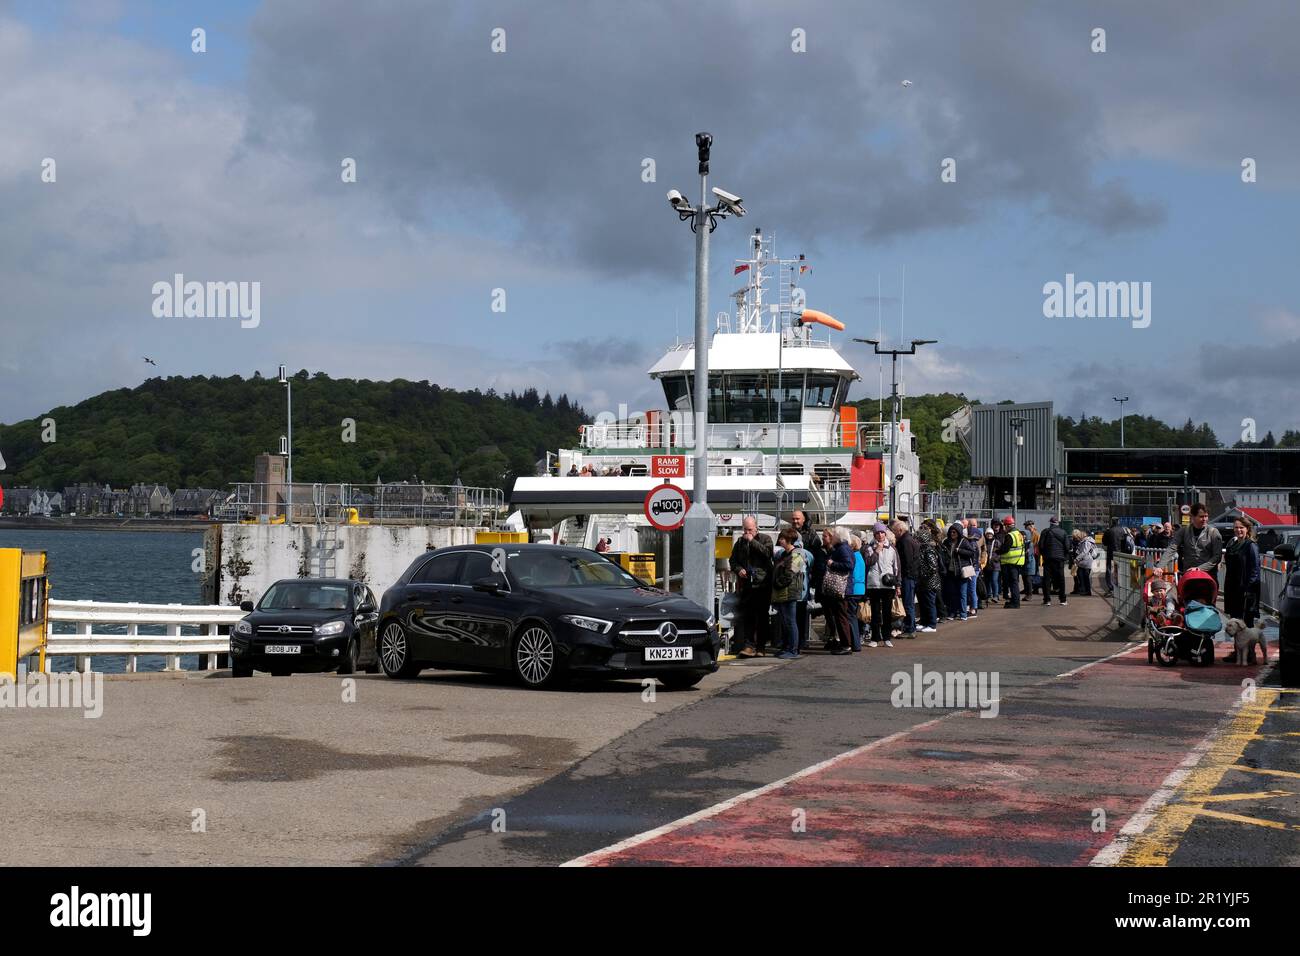 Oban, Scotland, UK. 16th May 2023.  A hive of activity at the Ferry terminal with passengers embarking Calmac ferries to the Hebridean Isles and disembarking back to the mainland. Cars disembarking the ferry and foot passengers waiting to board. MV Loch Frisa ferry operates a service between Oban and Craignure on the Isle of Mull. Credit: Craig Brown/Alamy Live News Stock Photo